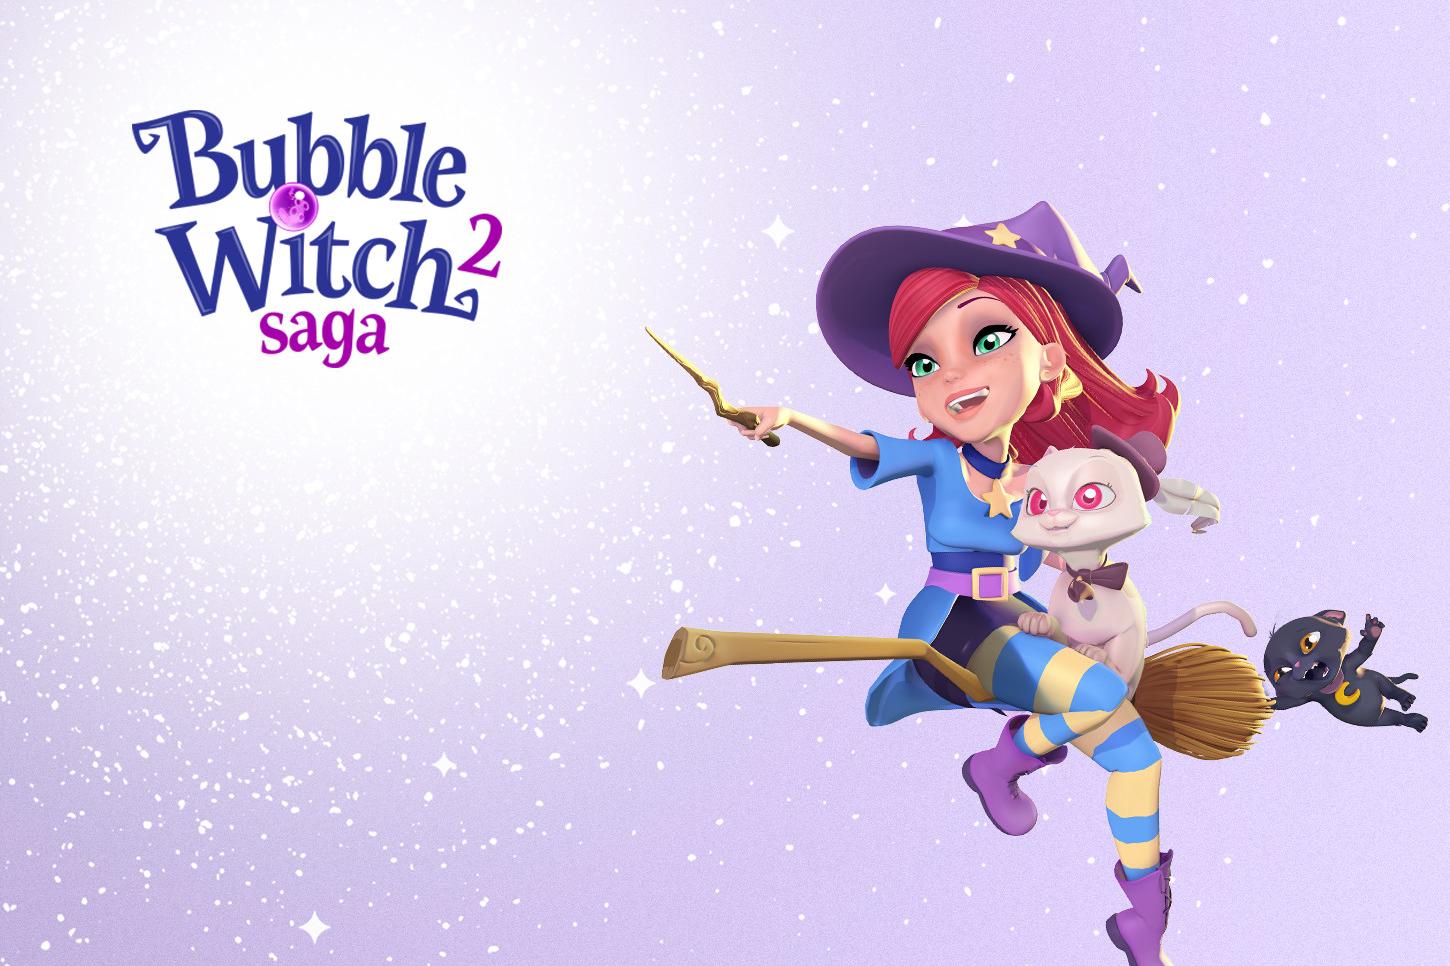 UI for King's mobile game: Bubble Witch 2 Saga